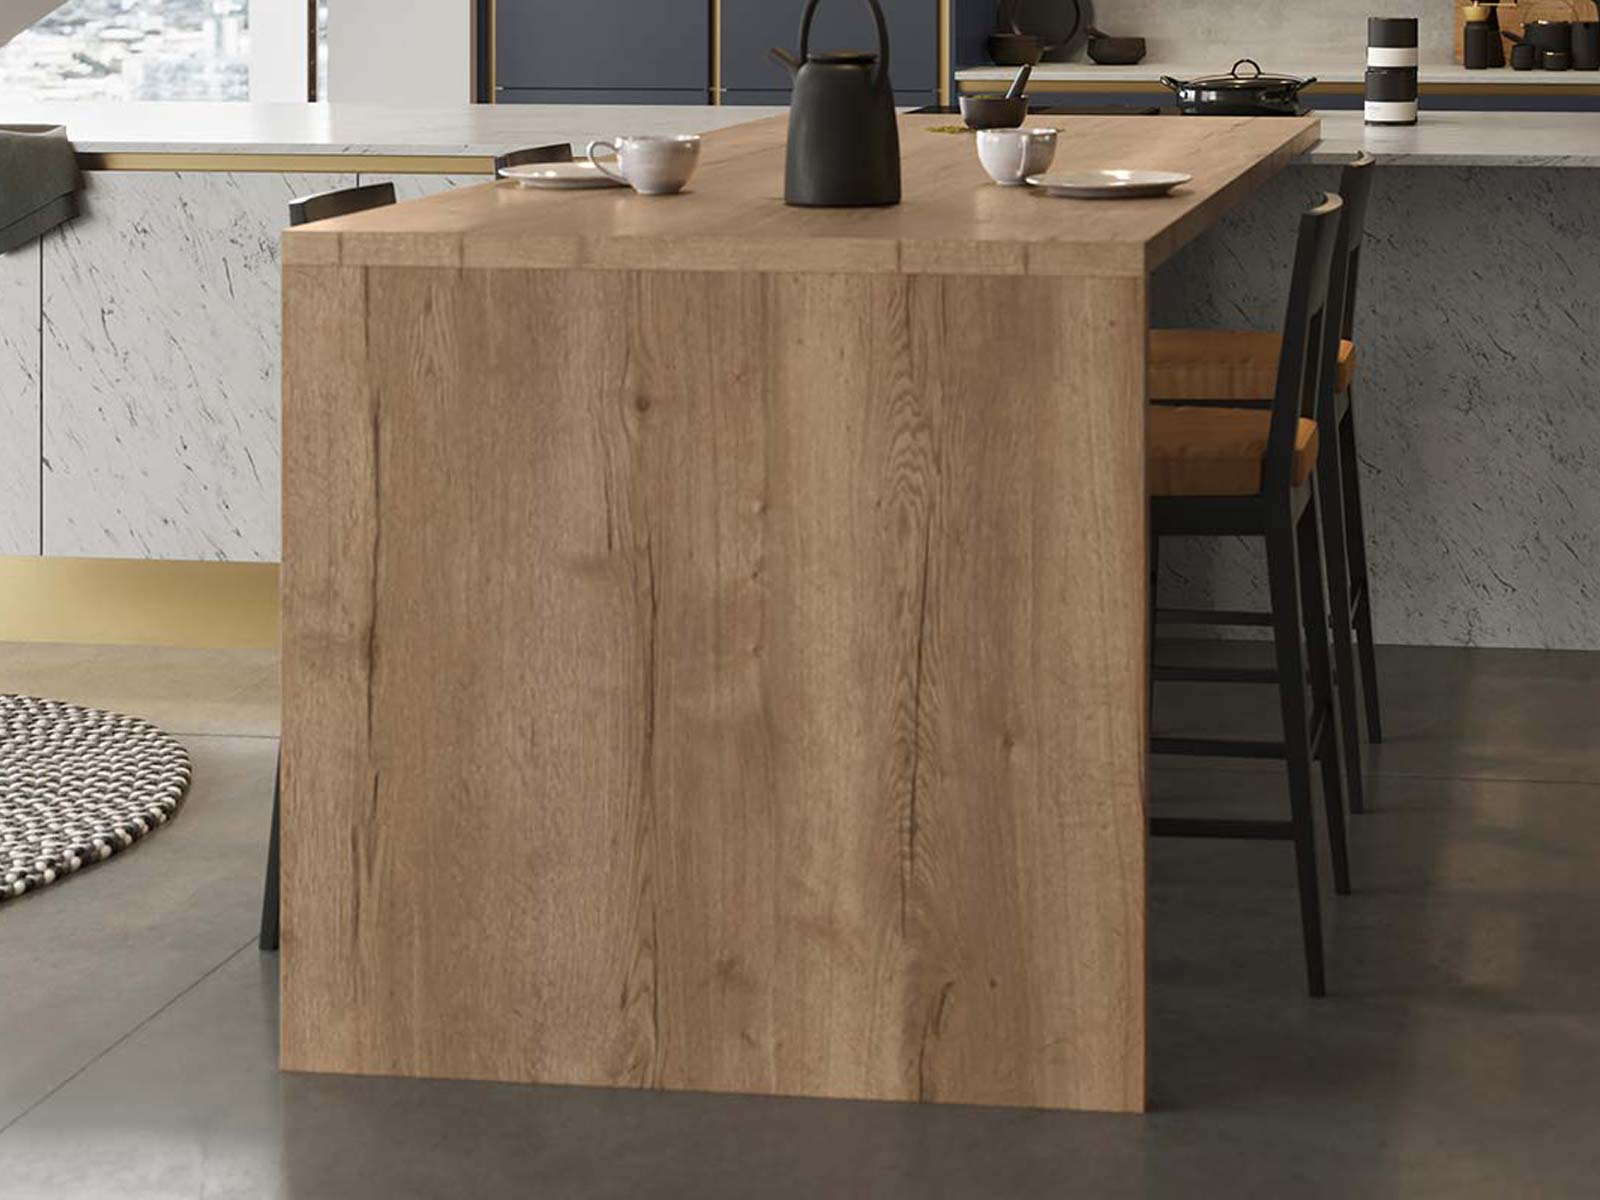 Wood-effect kitchen work surface with stone-effect cabinet doors